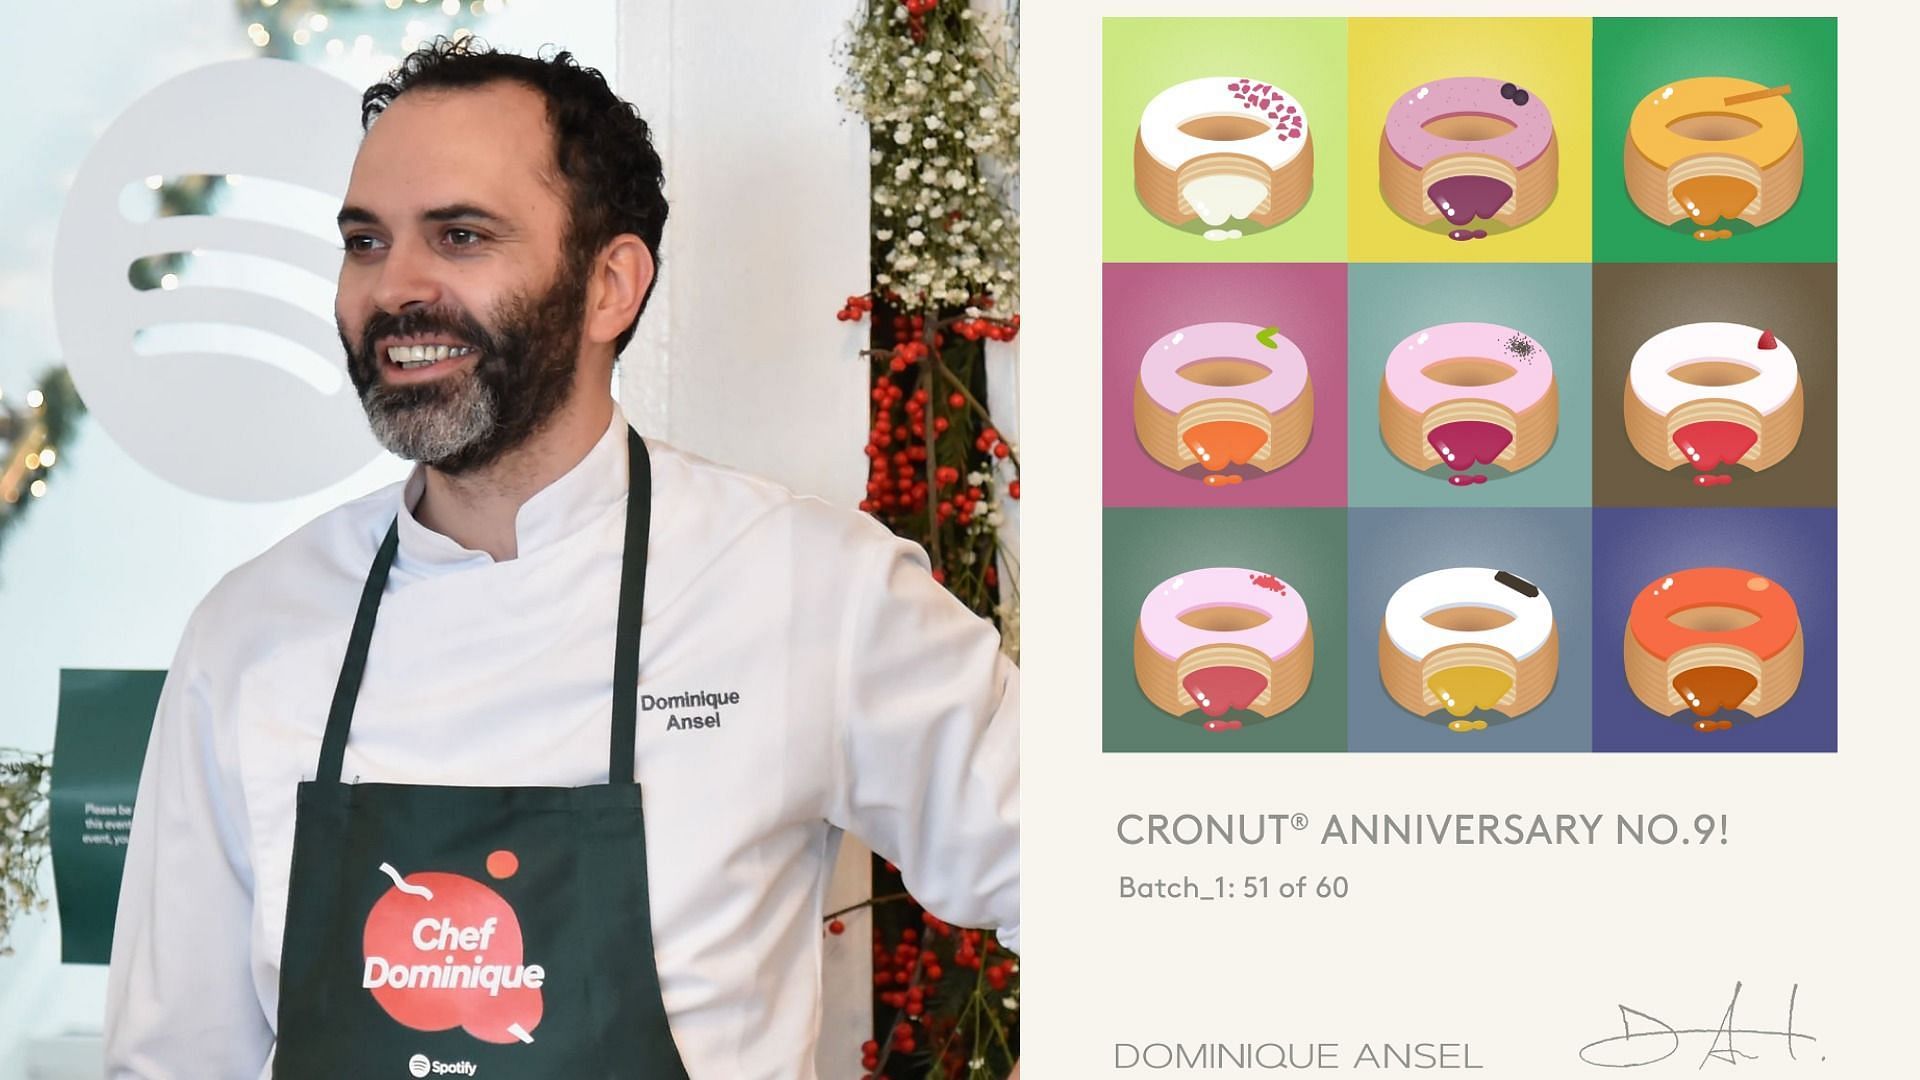 Chef Dominique Ansel releases Cronut NFTs to celebrate its 9th anniversary (Images via Kevin Mazur/Getty Images and Dominique Ansel Bakery)